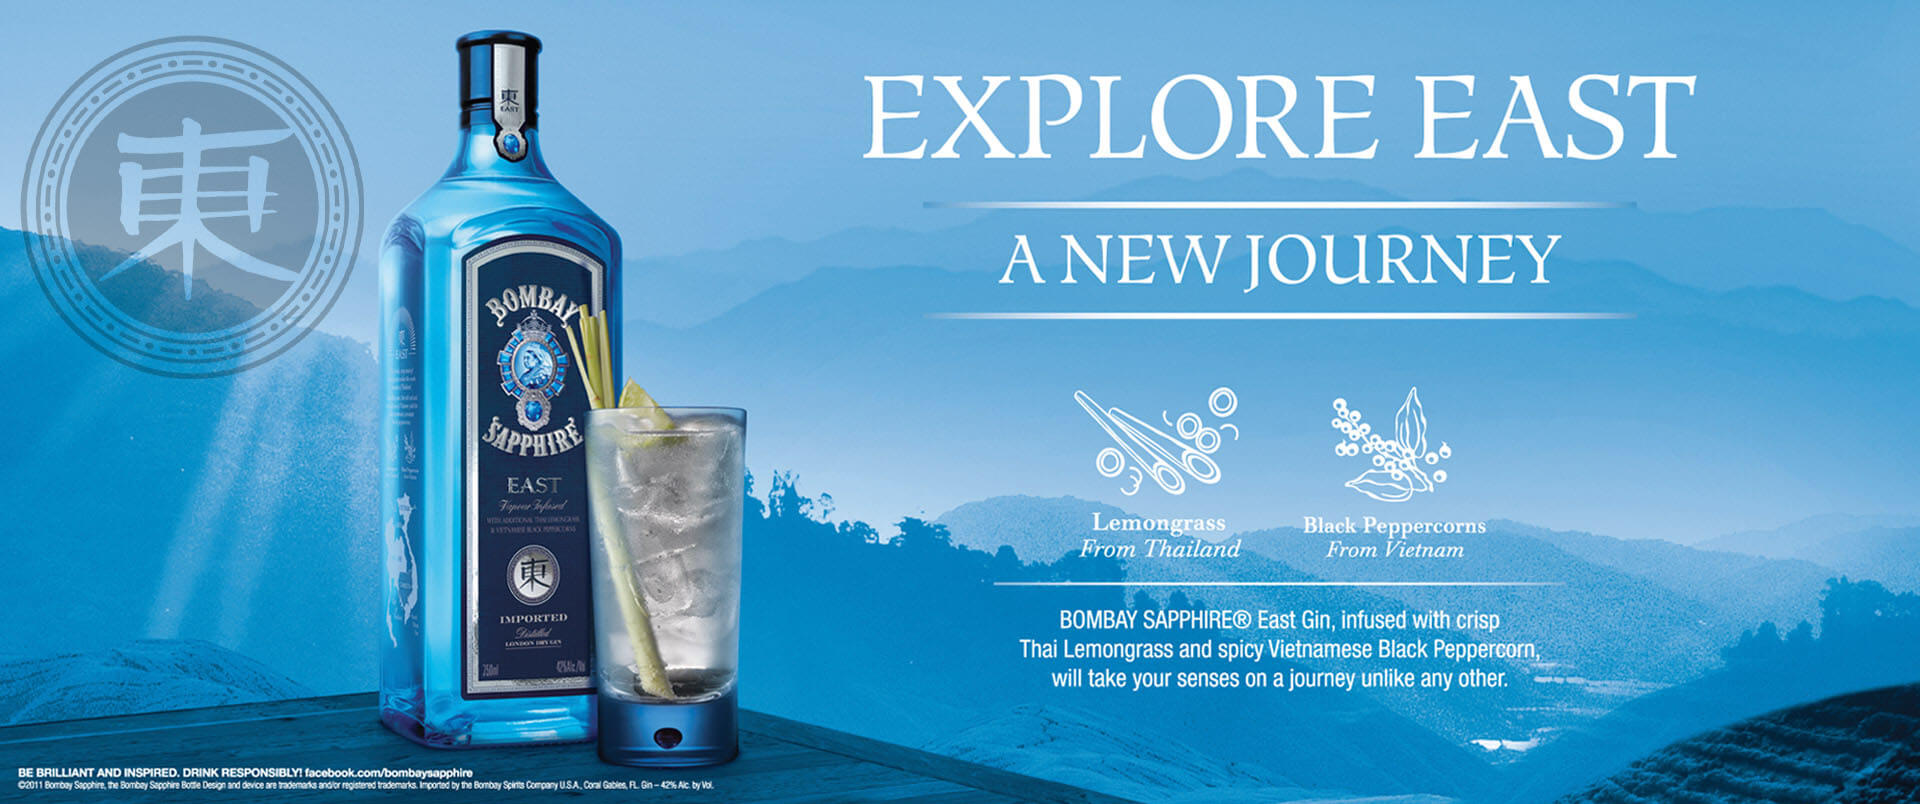 Bombay Sapphire East store branding for World Duty Free - Explore East a new journey